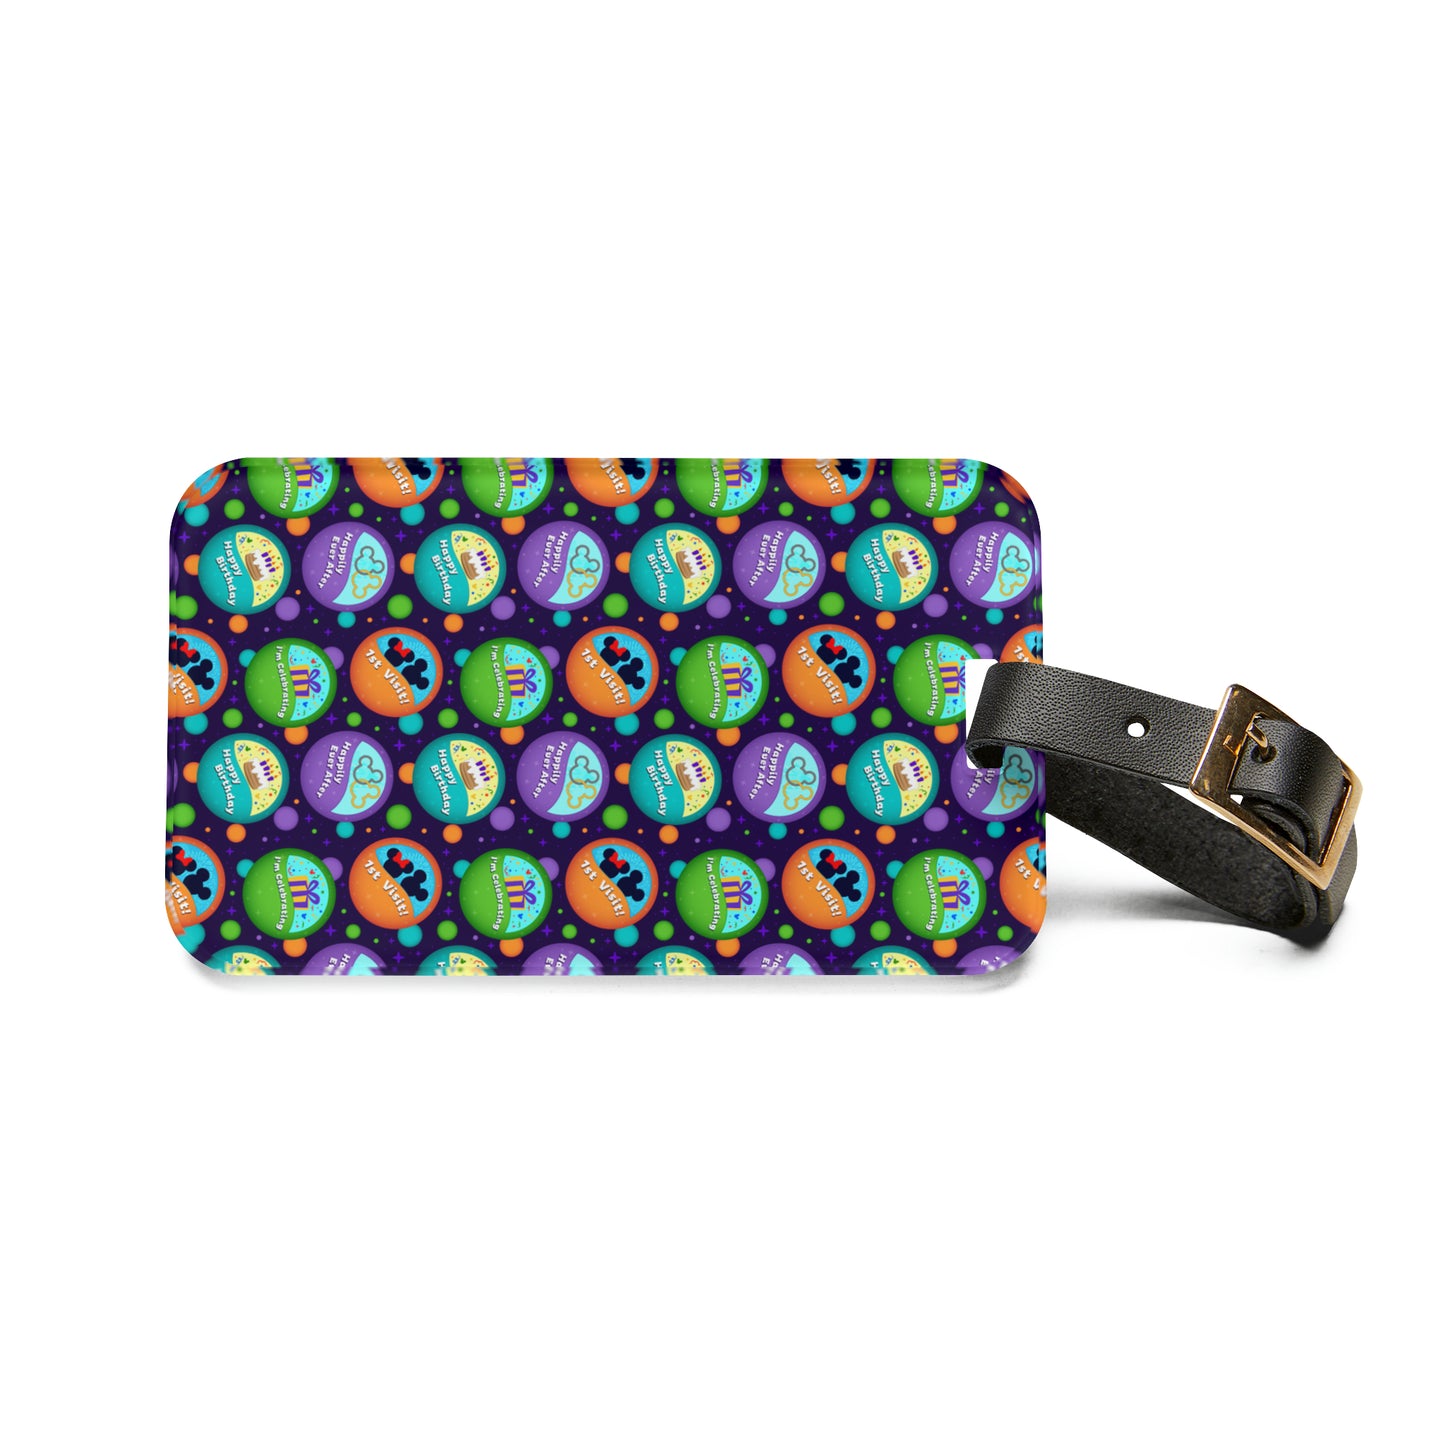 Button Collector Luggage Tag